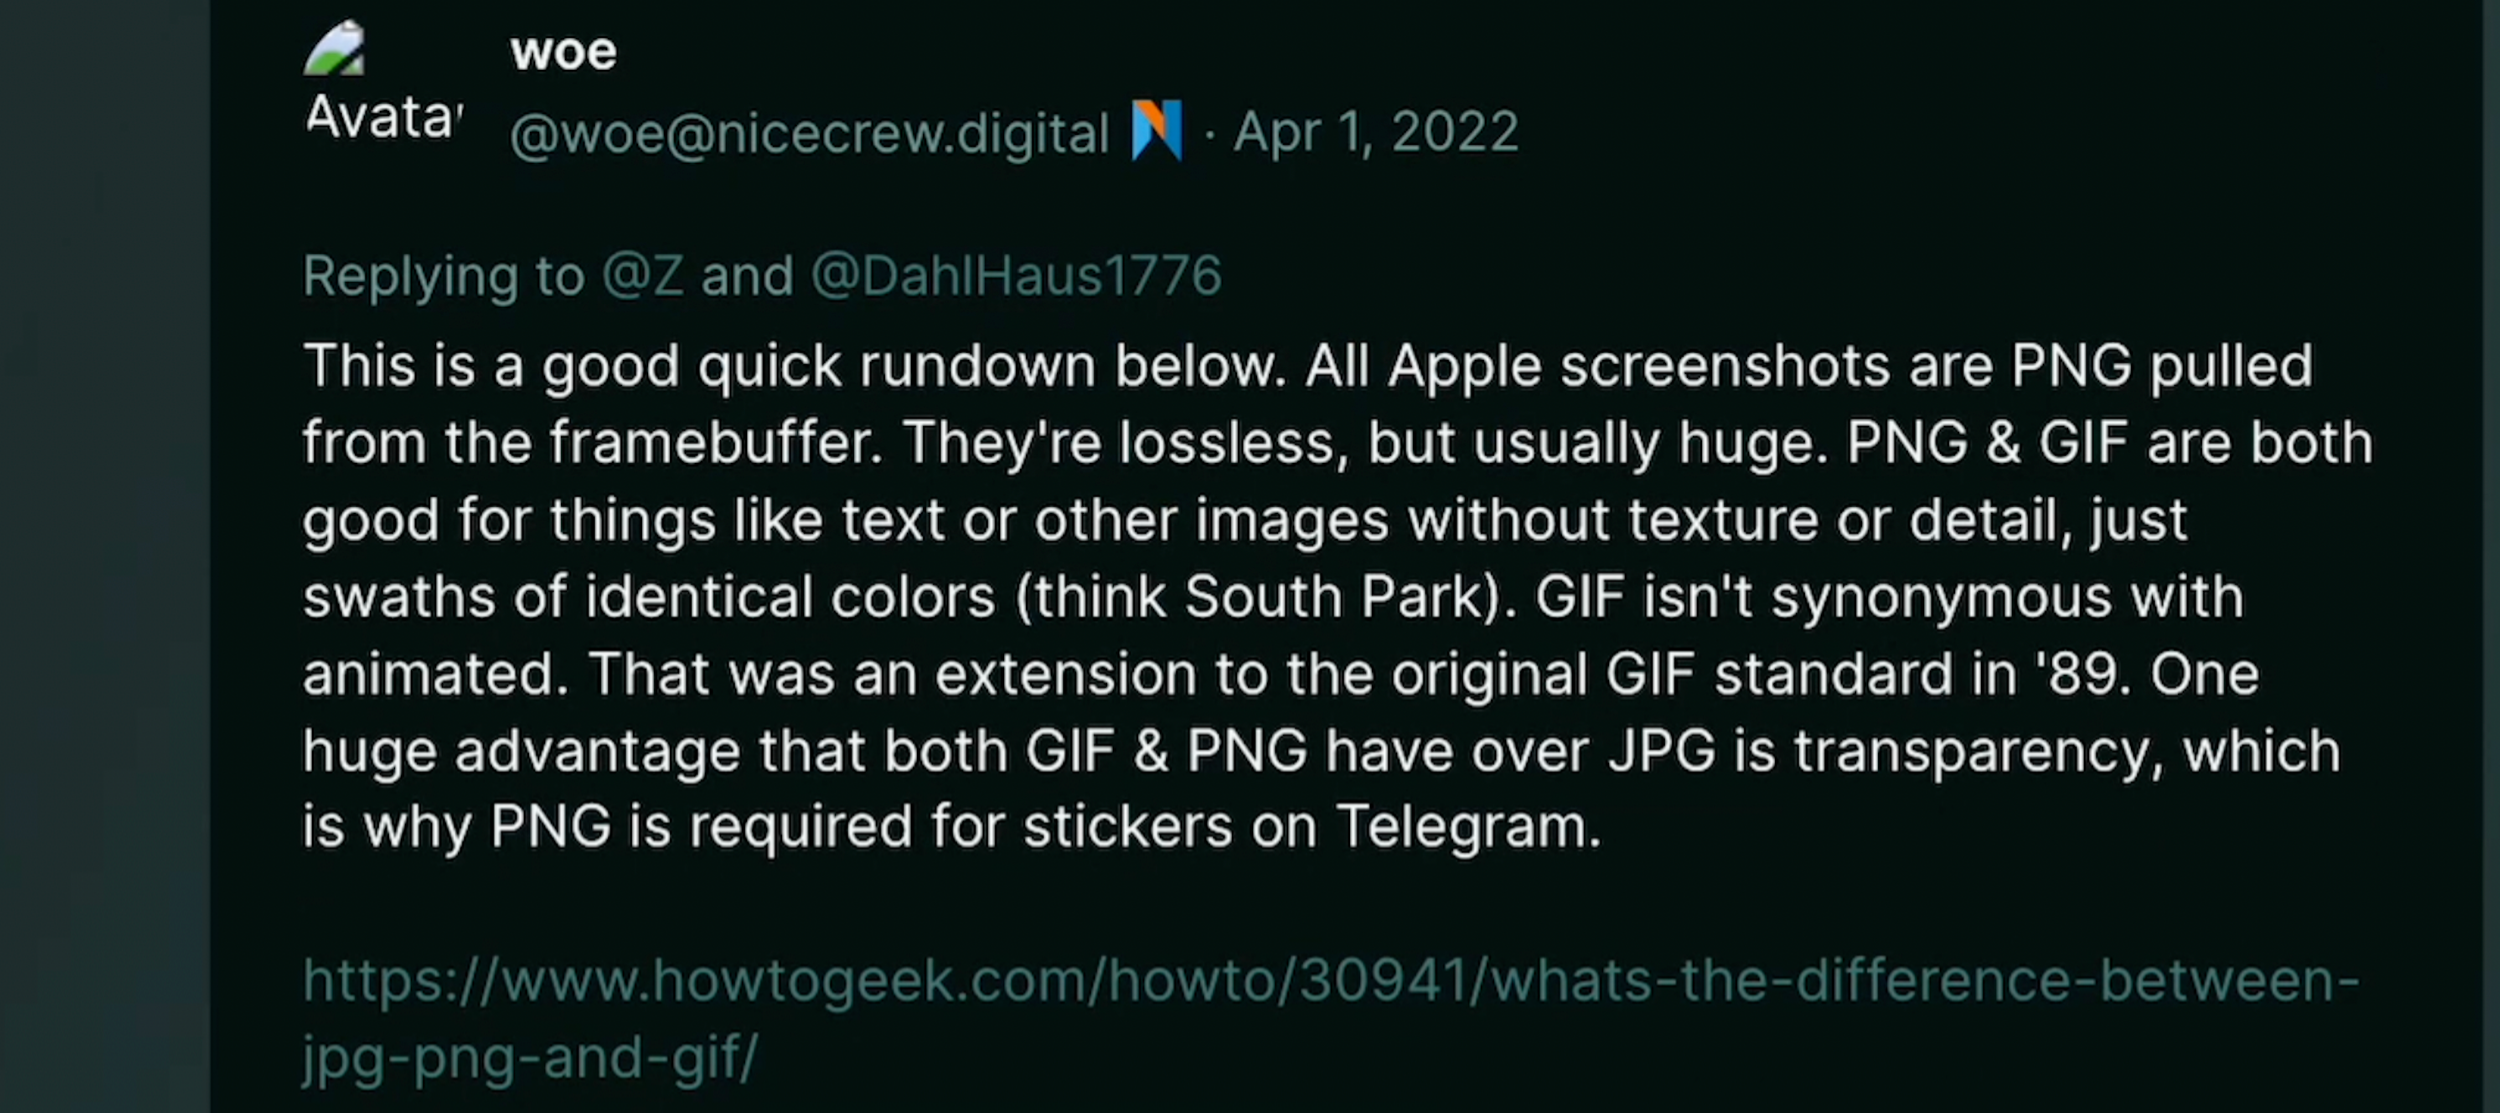 Dumperth on Poast: "This is a good quick rundown below. All Apple screenshots are PNG pulled from the framebuffer. They're lossless, but usually huge. PNG and GIF are both good for things like text or other images without texture o detail, just swaths of identical colors (think South Park). GIF isn't synonymous with animated. That was an extension to the original GIF standard in '89. One huge advantage that both GIF and PNG have over JPG is transparency, which is why PNG is required for stickers on Telegram."